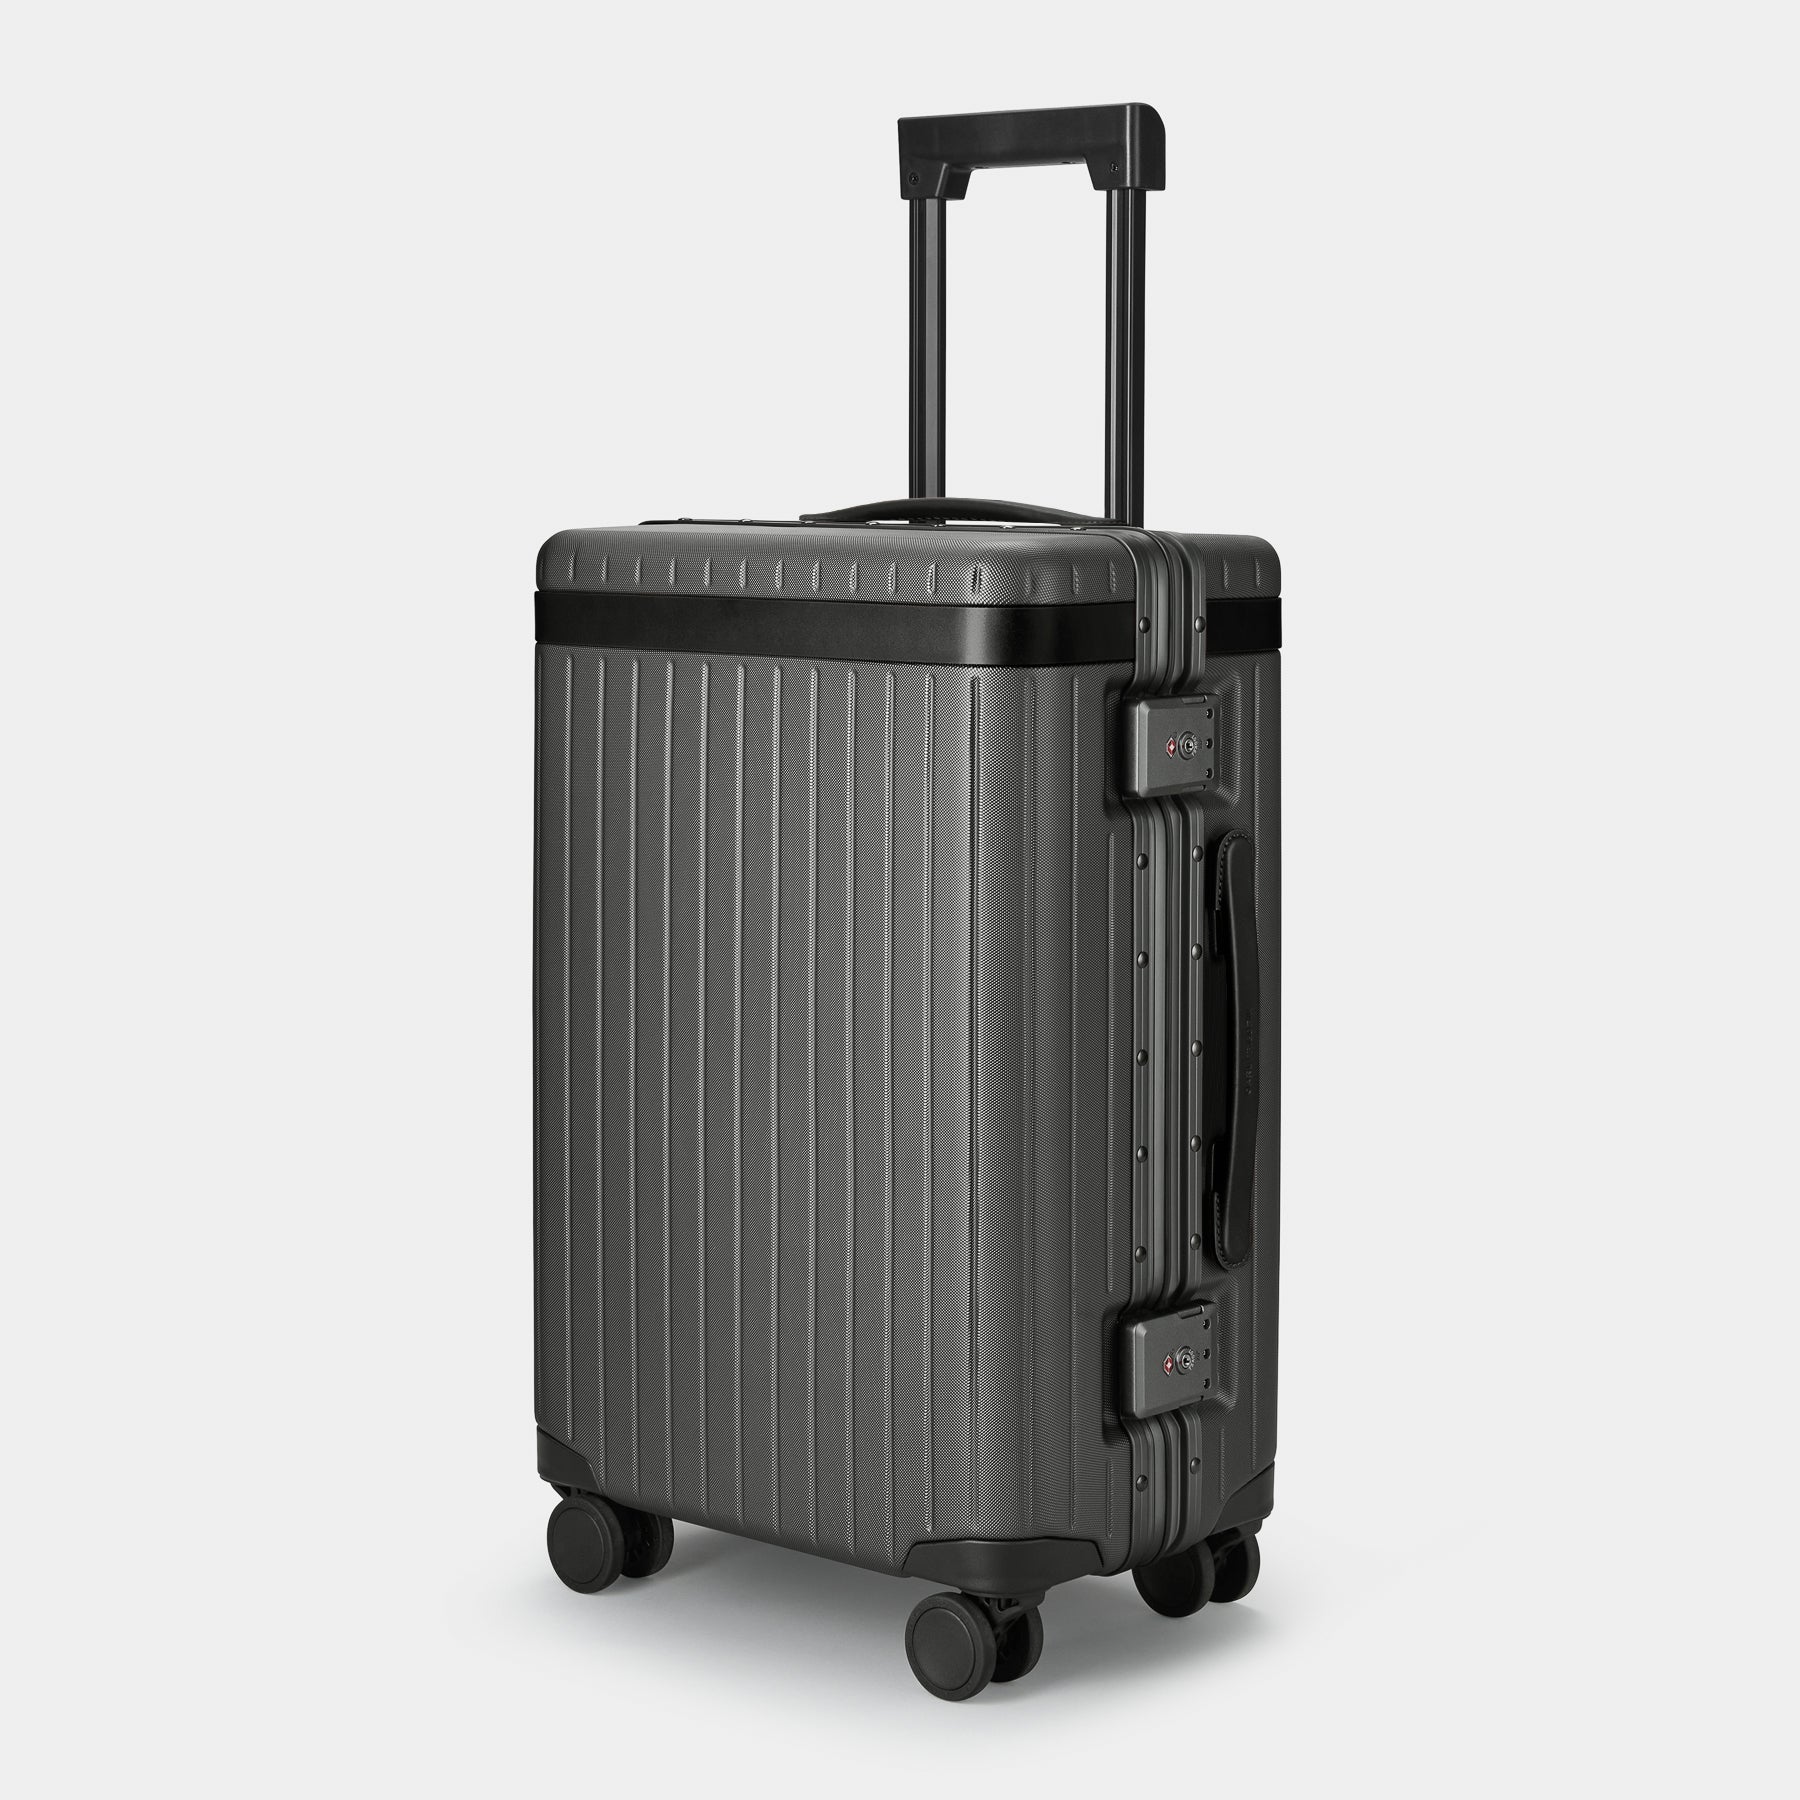 The Carry-on - Return Black Dark grey polycarbonate suitcase - Fair Condition